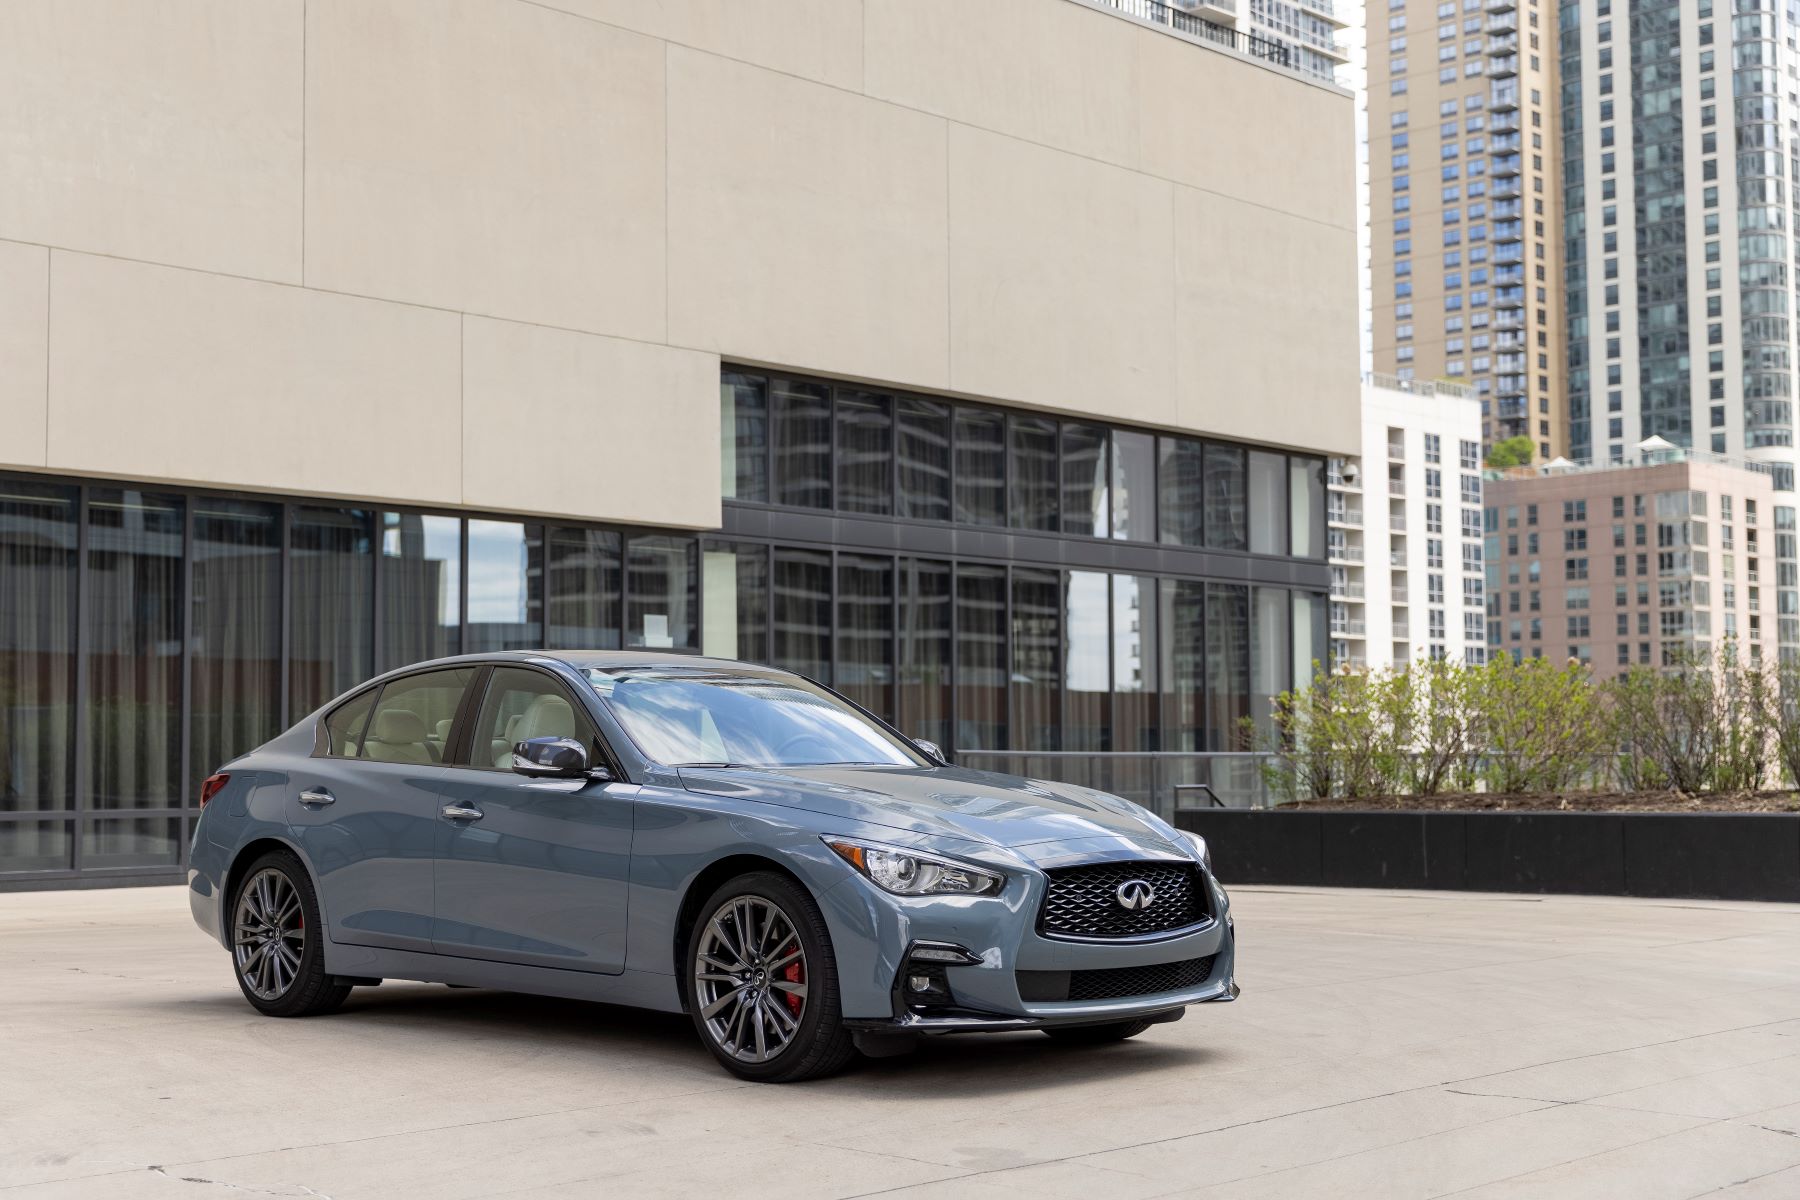 2022 Infiniti Q50 luxury sedan in light blue parked on a building's rooftop